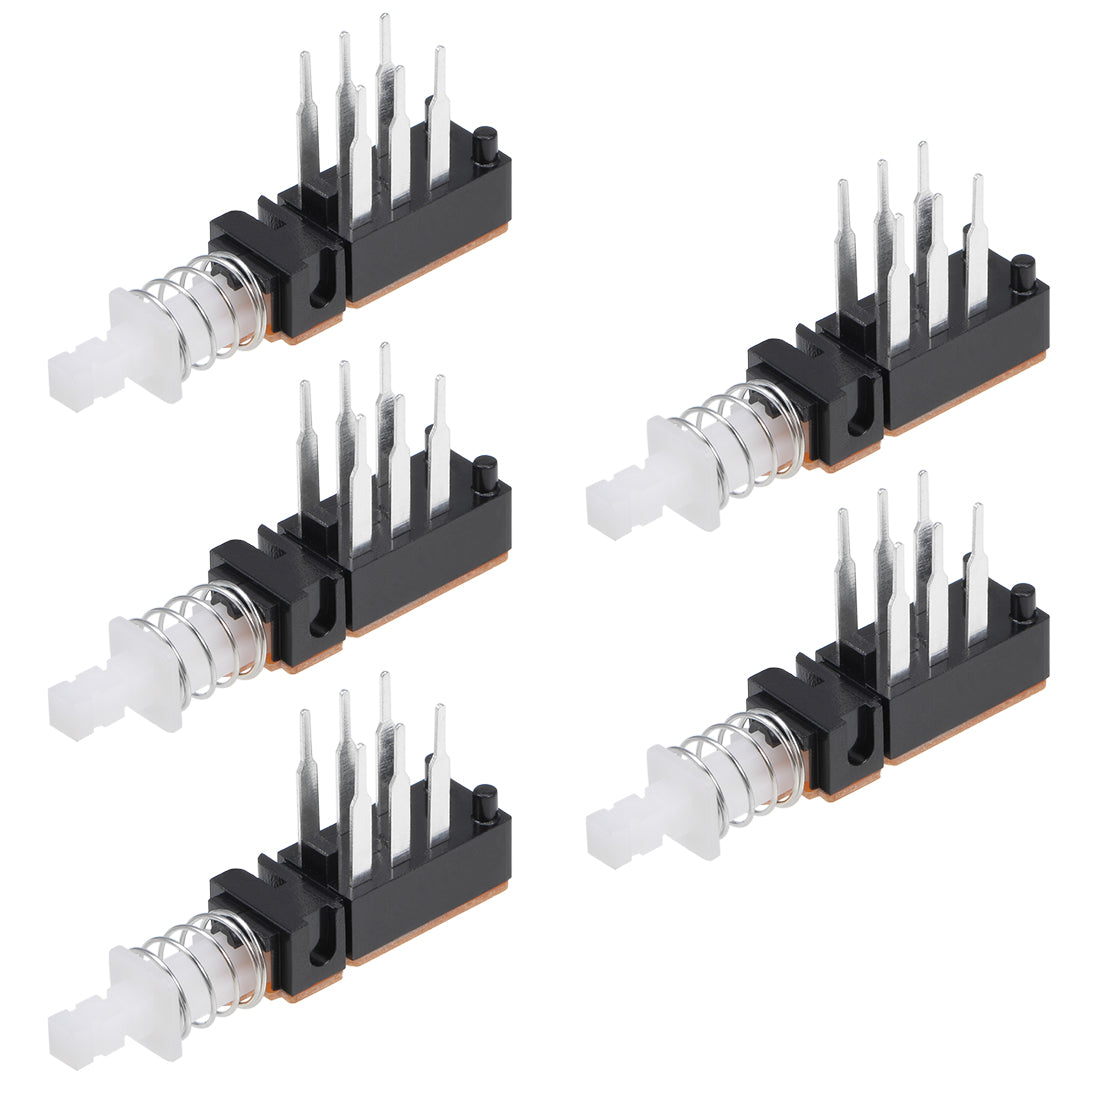 uxcell Uxcell Push Button Switch DPDT 6 Pin 1 Position Self-Locking Black 5pcs